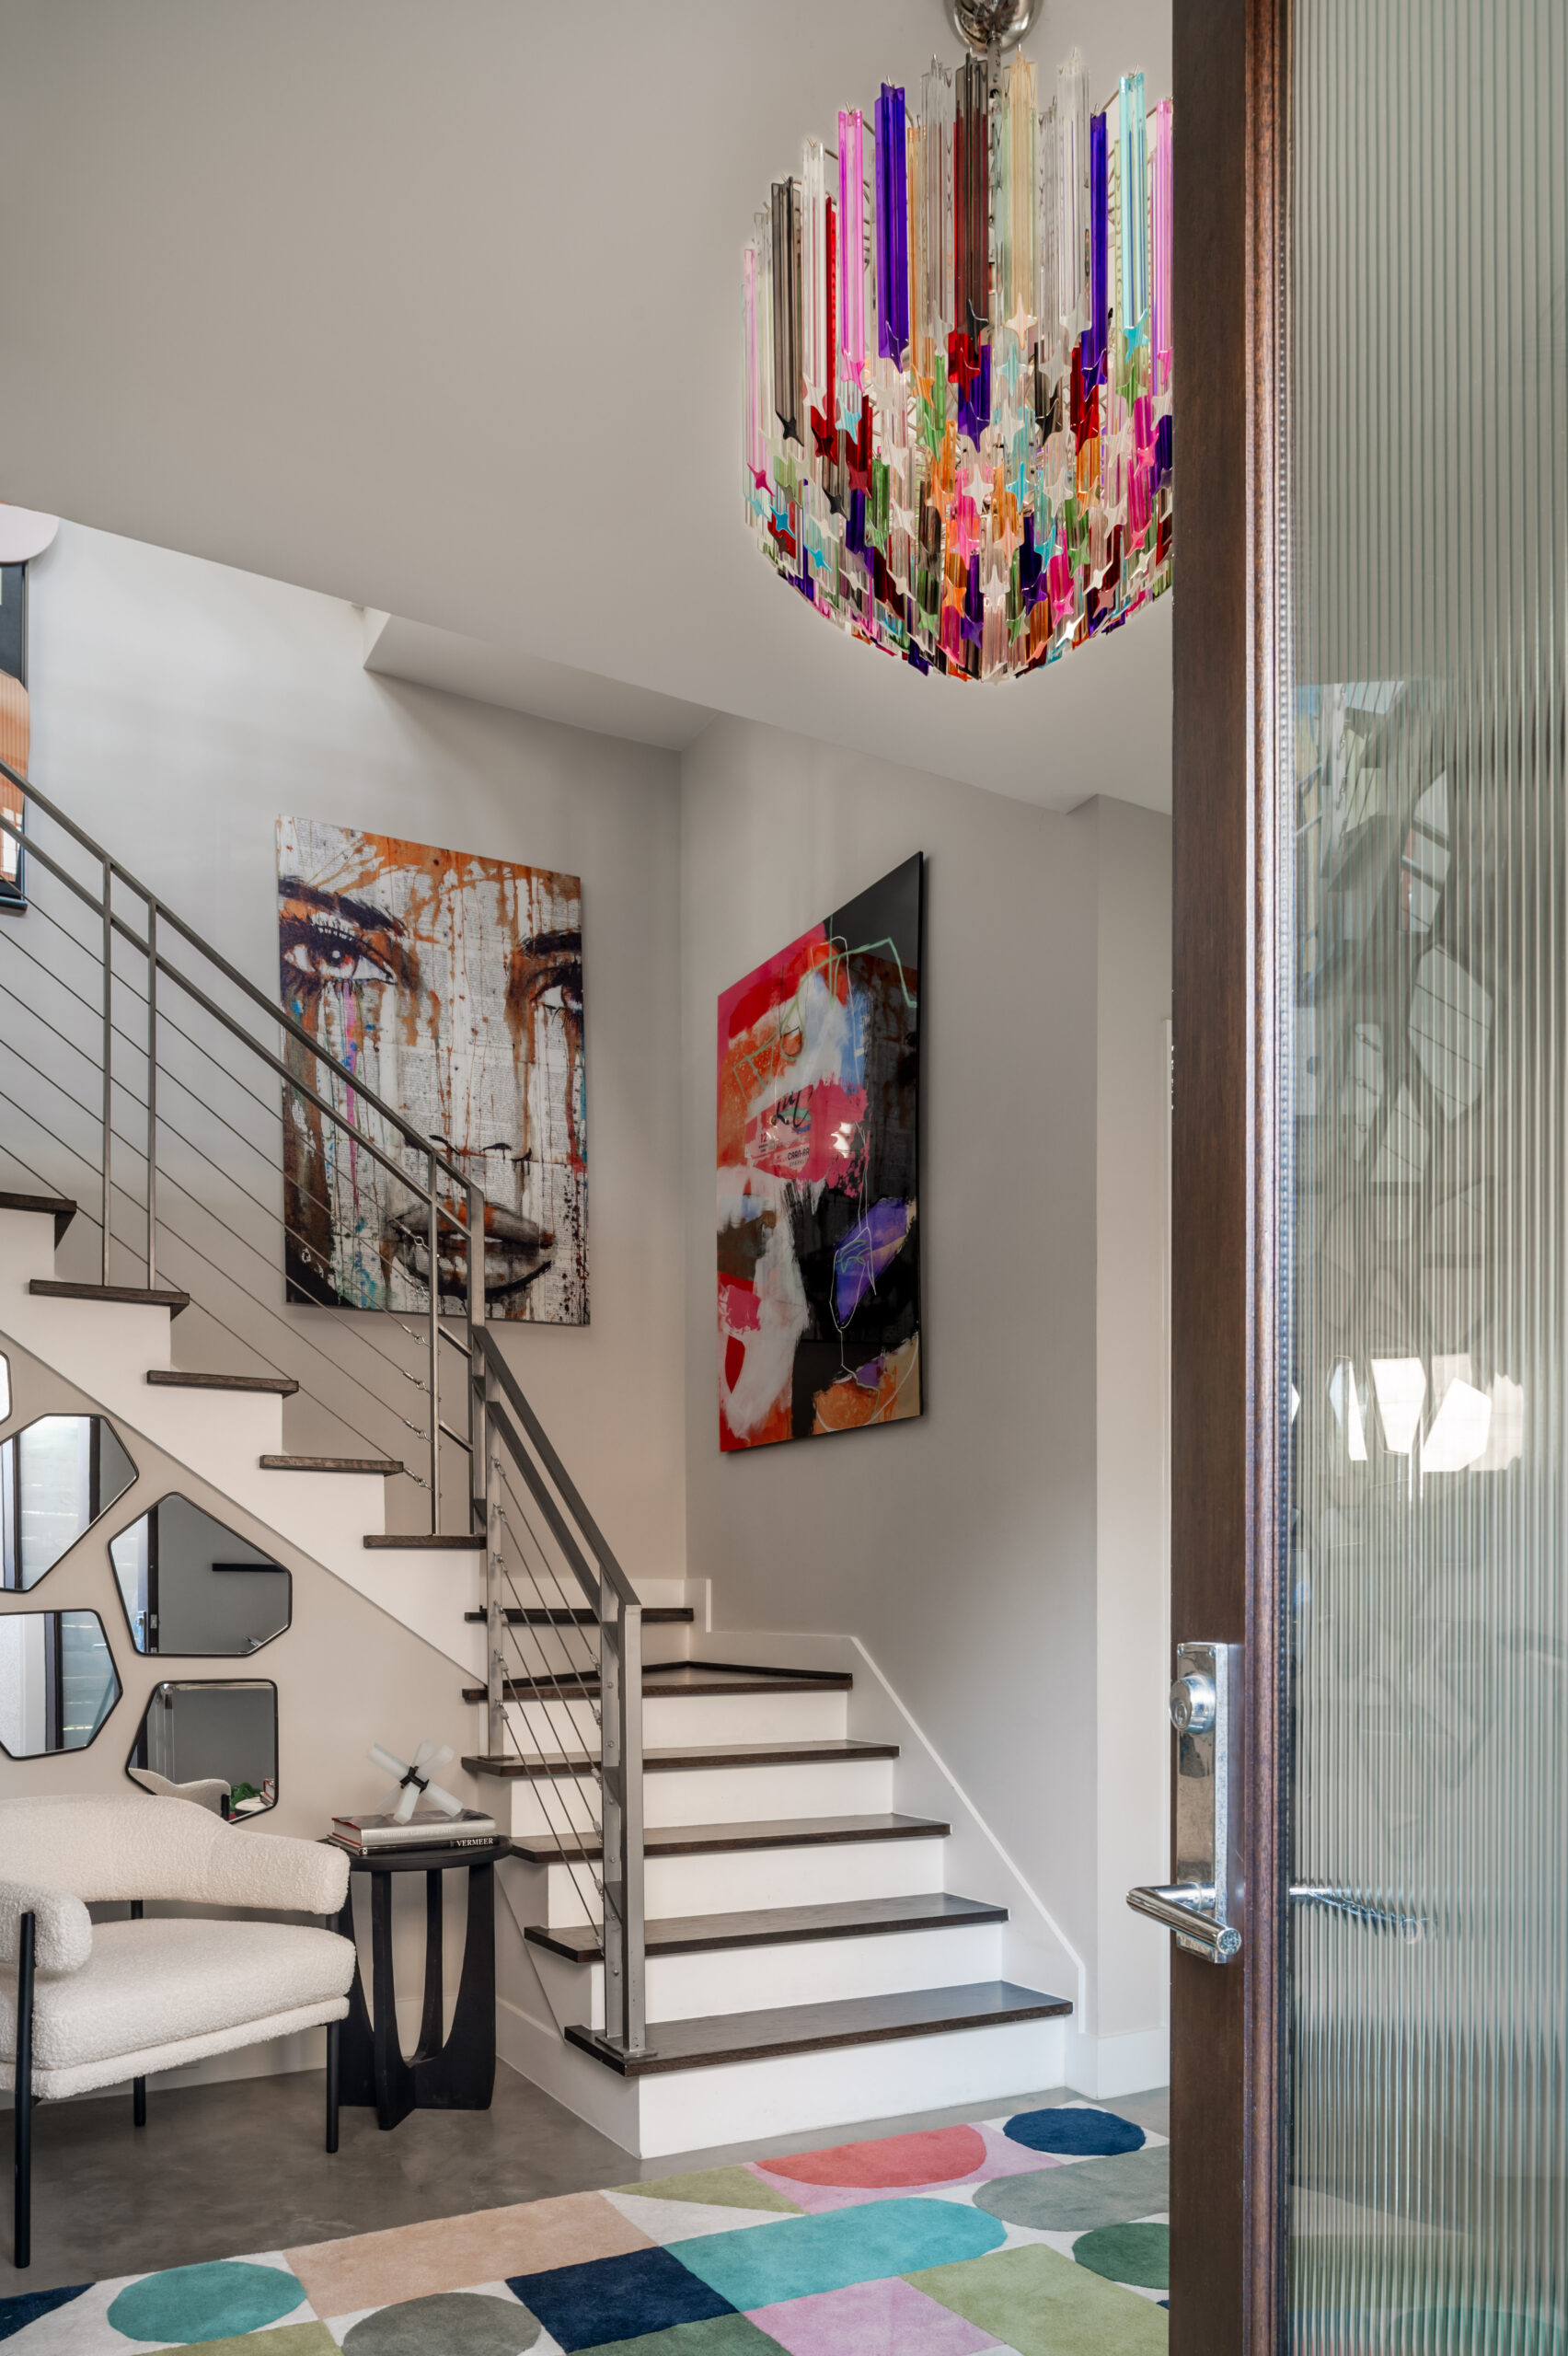 Funkiest art, wall of mirrors, and the Murano glass chandelier from Italy